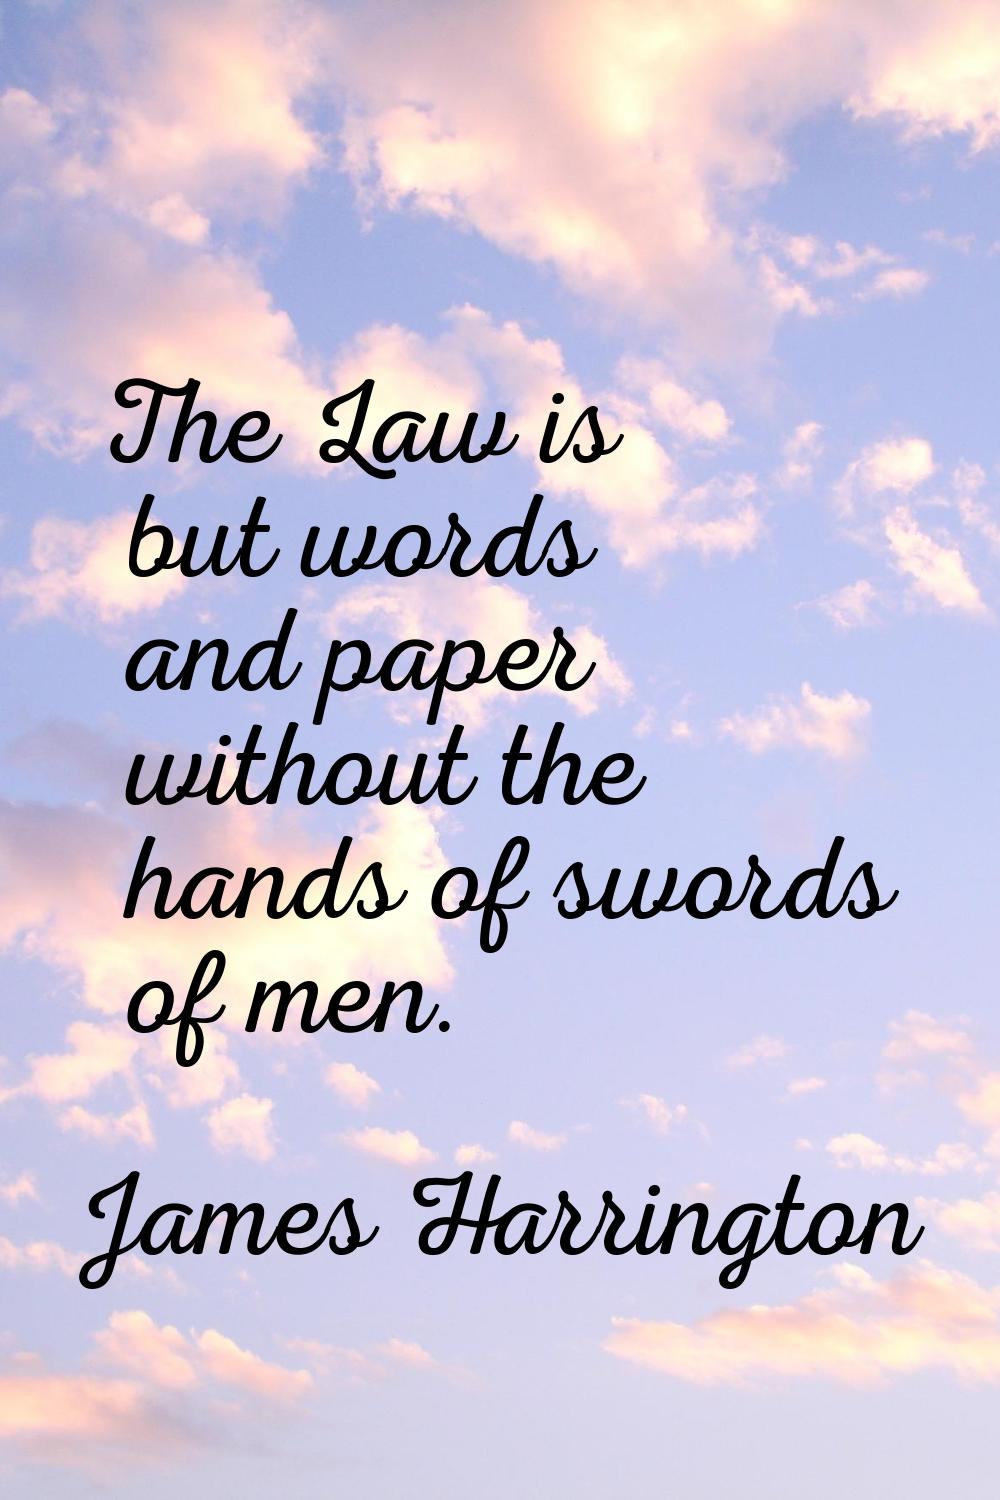 The Law is but words and paper without the hands of swords of men.